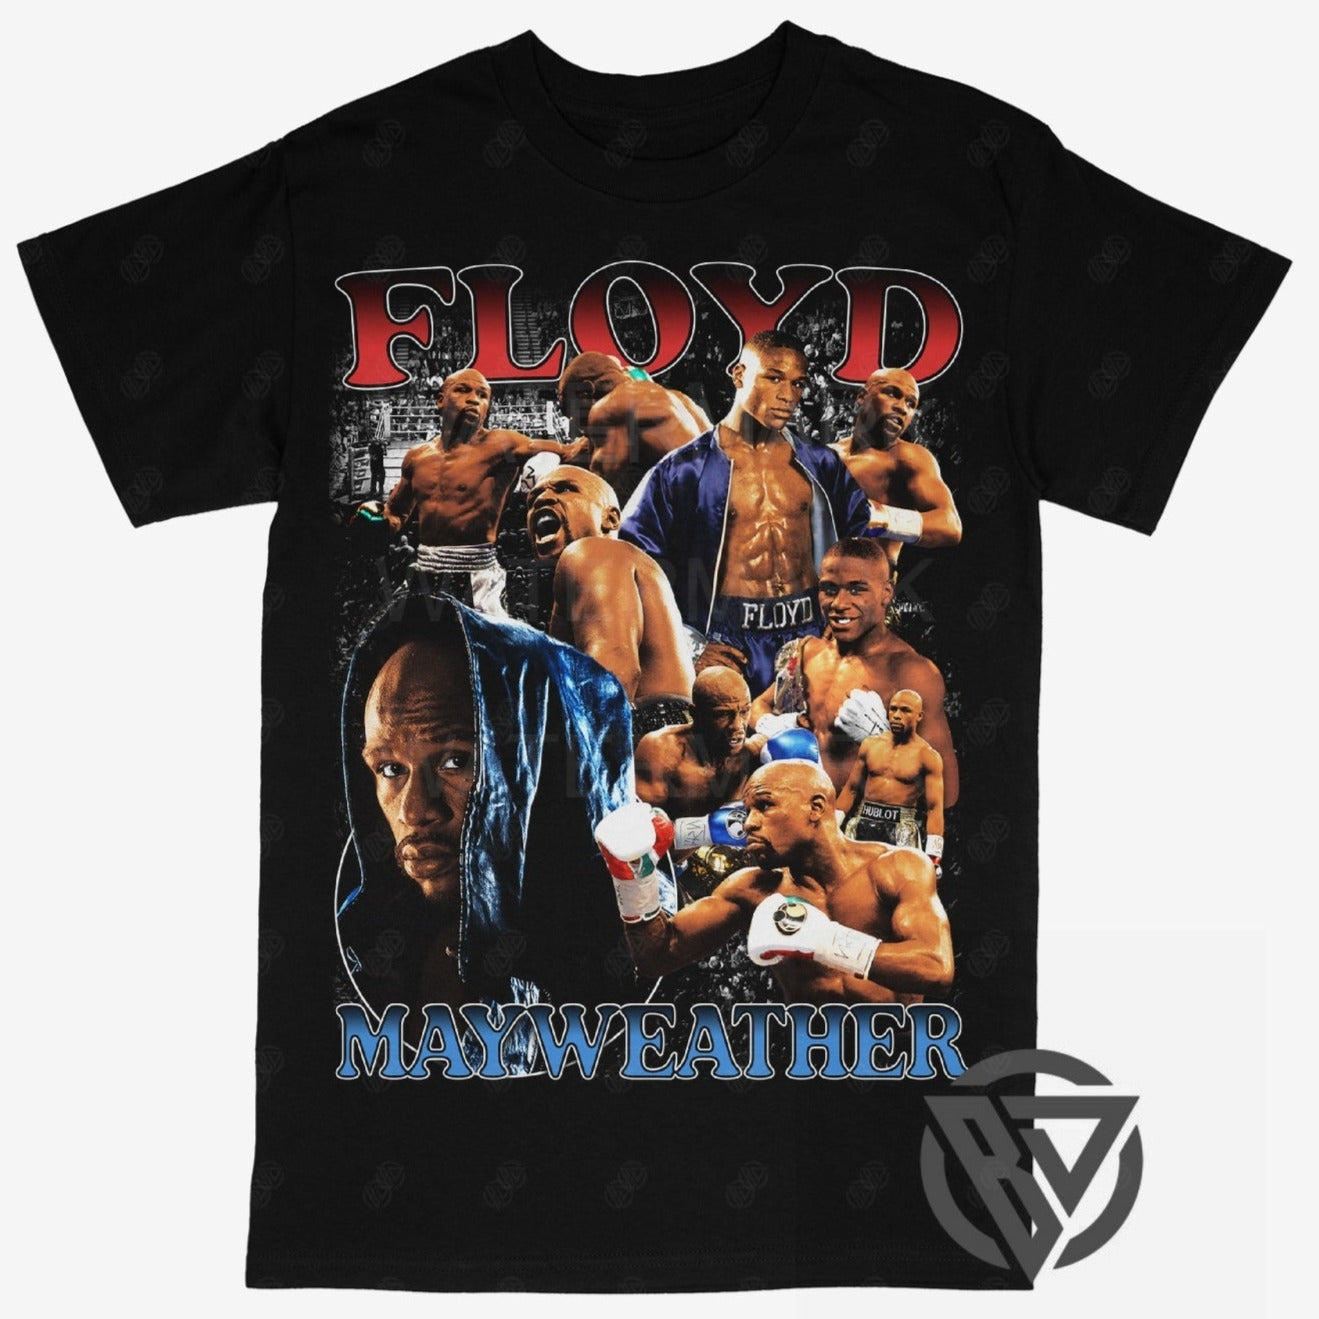 Floyd Mayweather Tee Shirt Boxing Fighter Fighting Champion Boxer (V2)